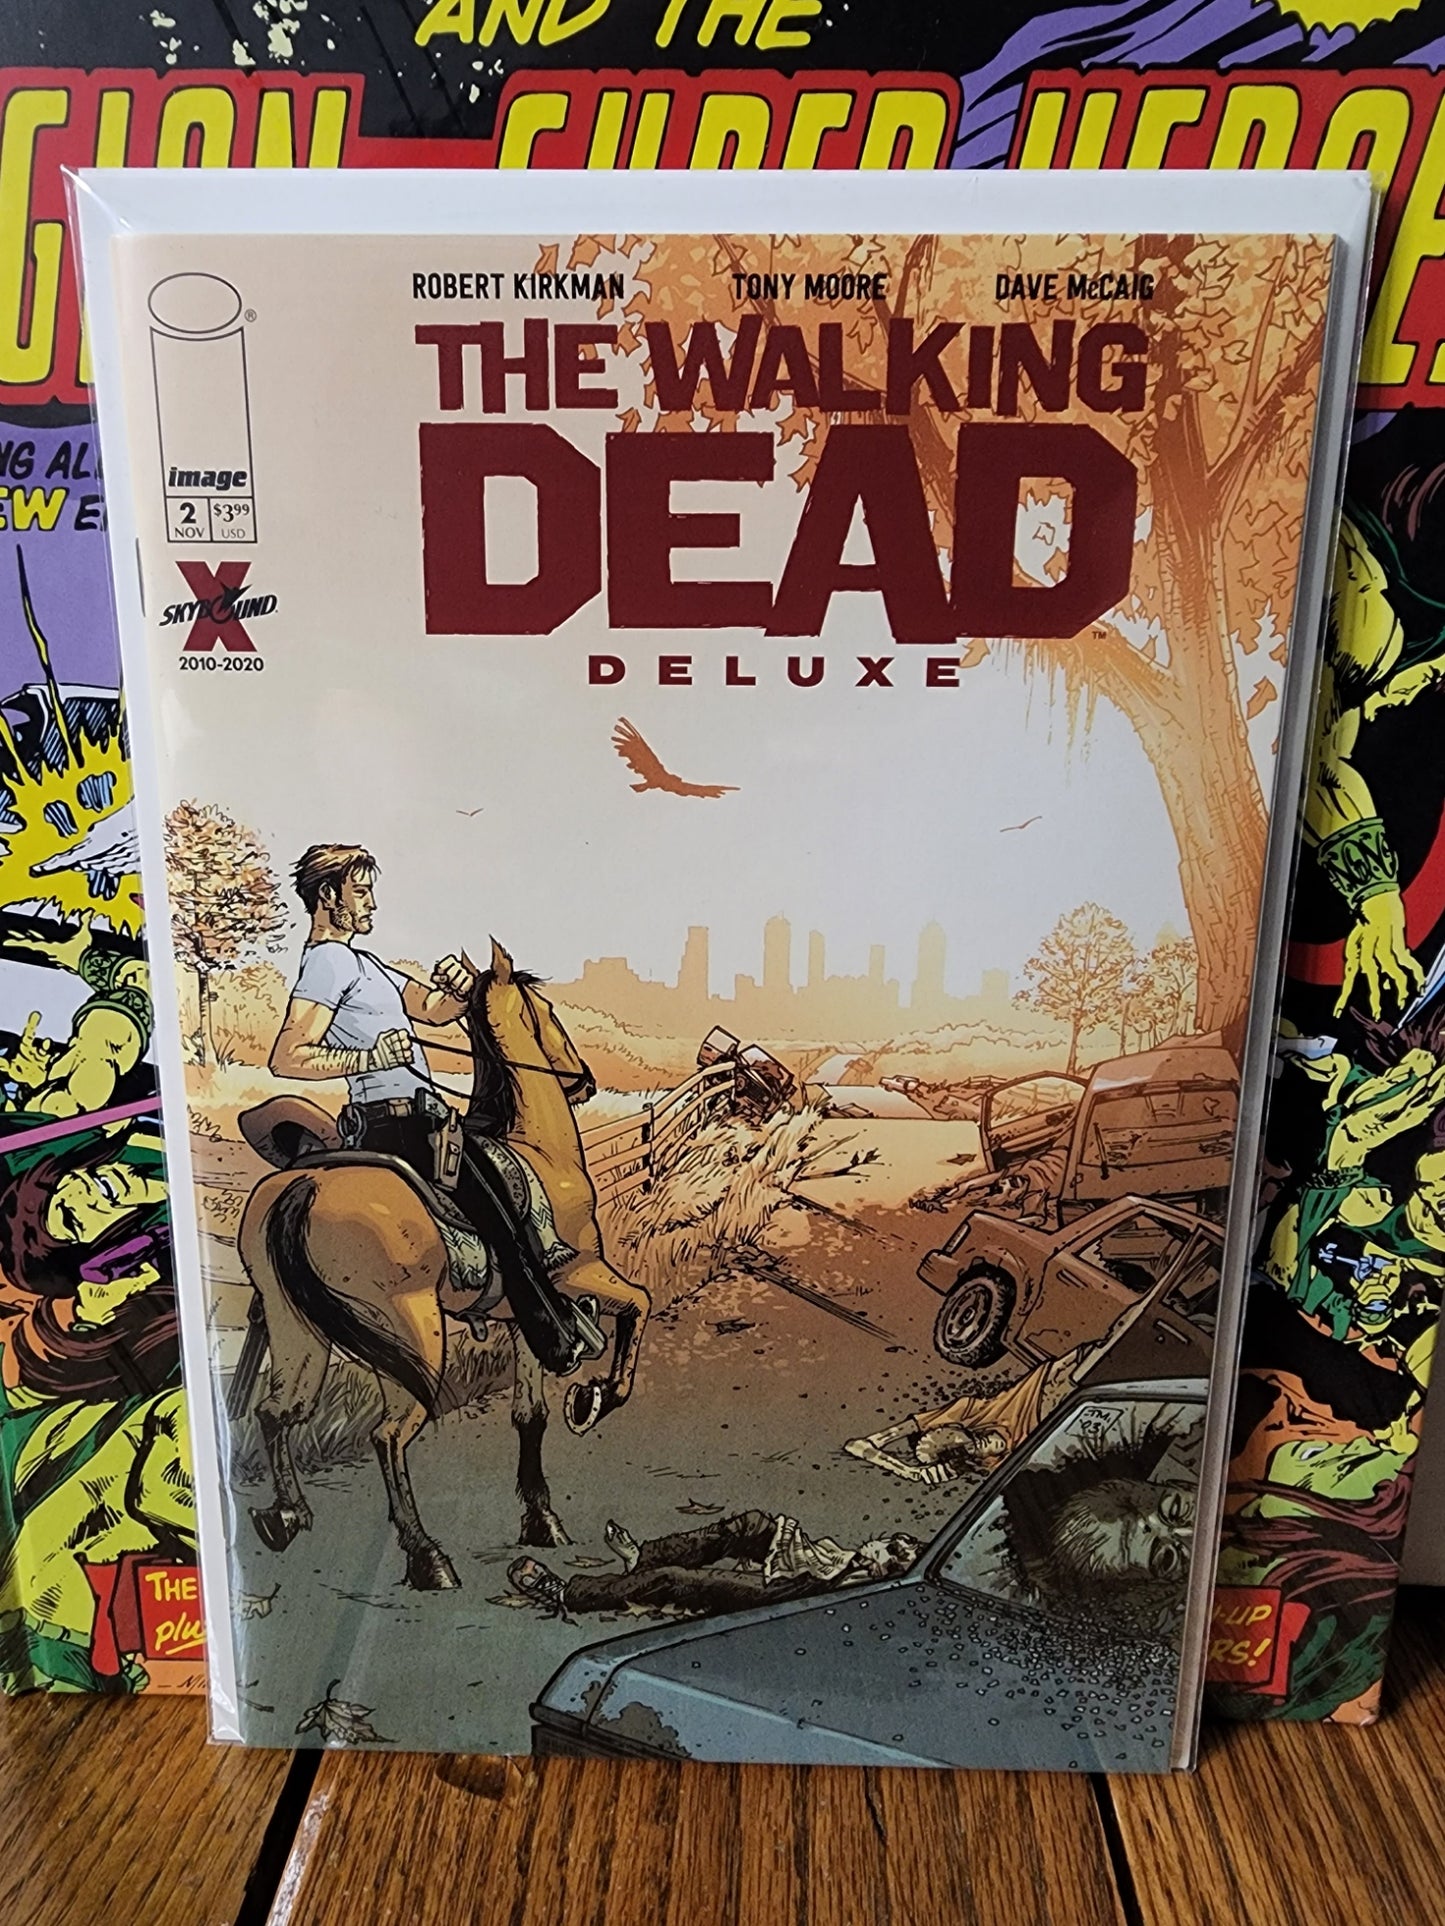 The Walking Dead Deluxe #2 Cover B (NM)